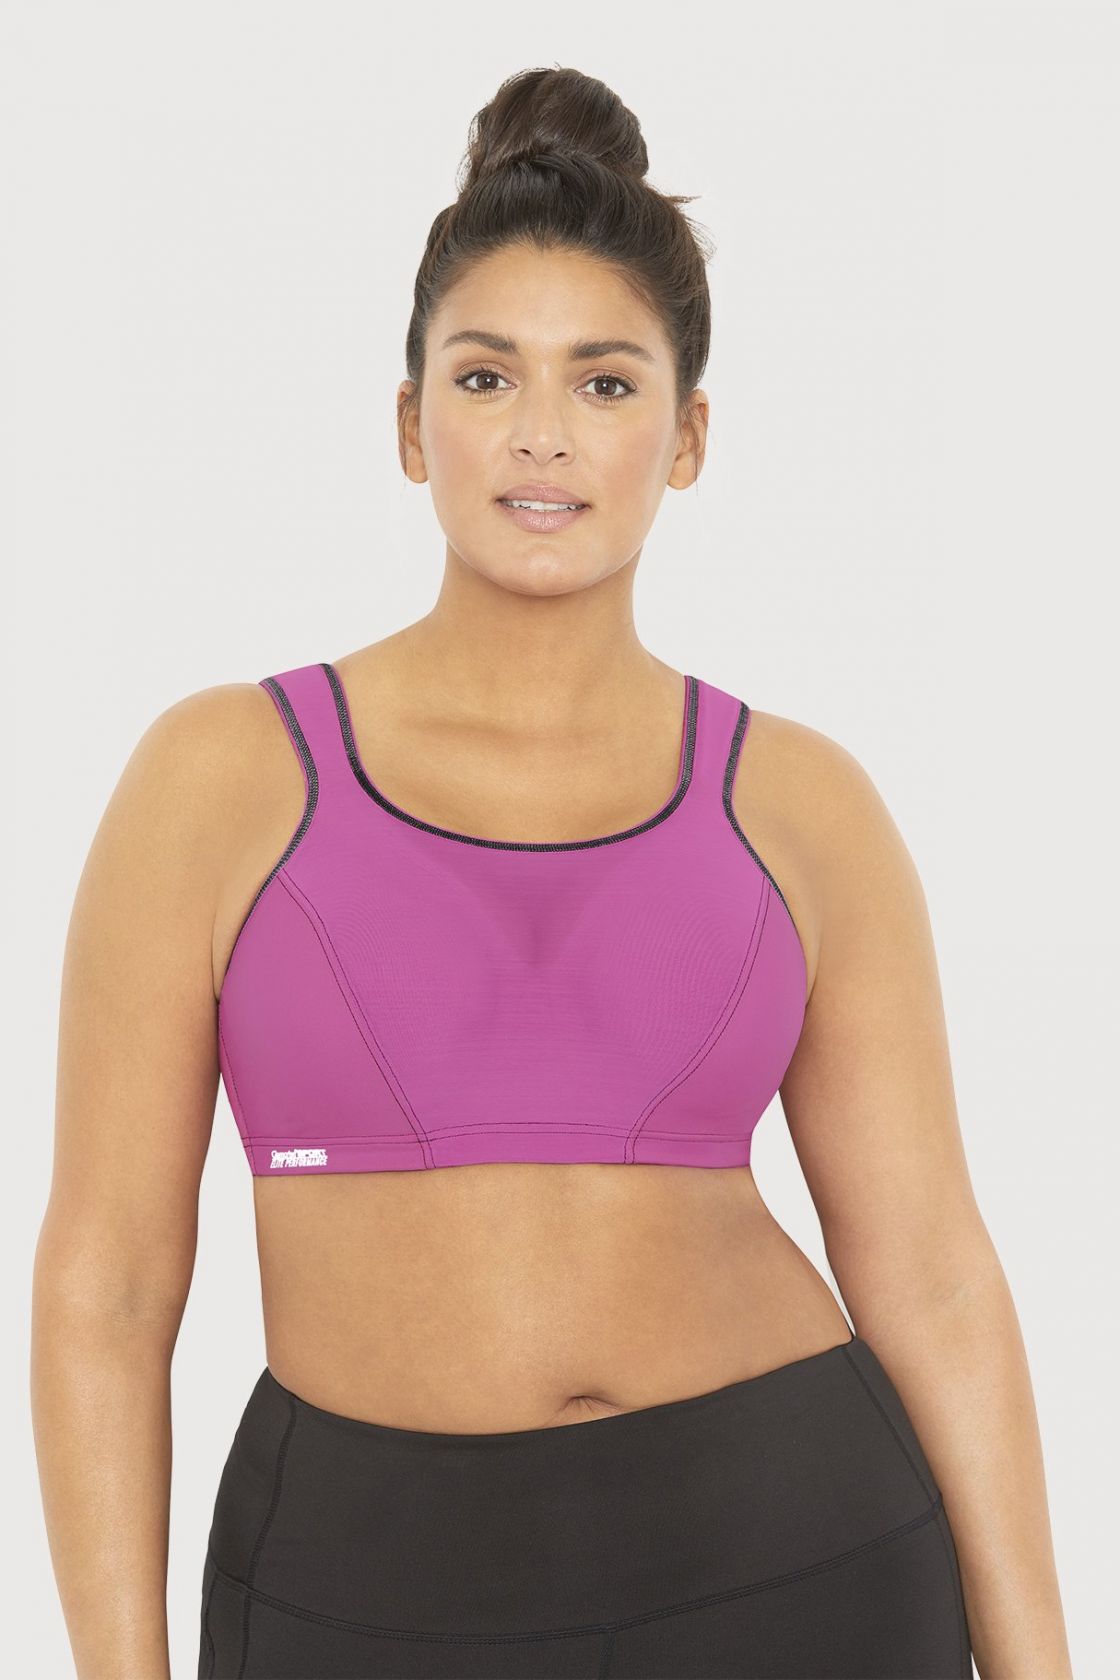 Royce S1149 Women's Impact Free Coral Pink Cotton High Impact Sports Bra  38I at  Women's Clothing store